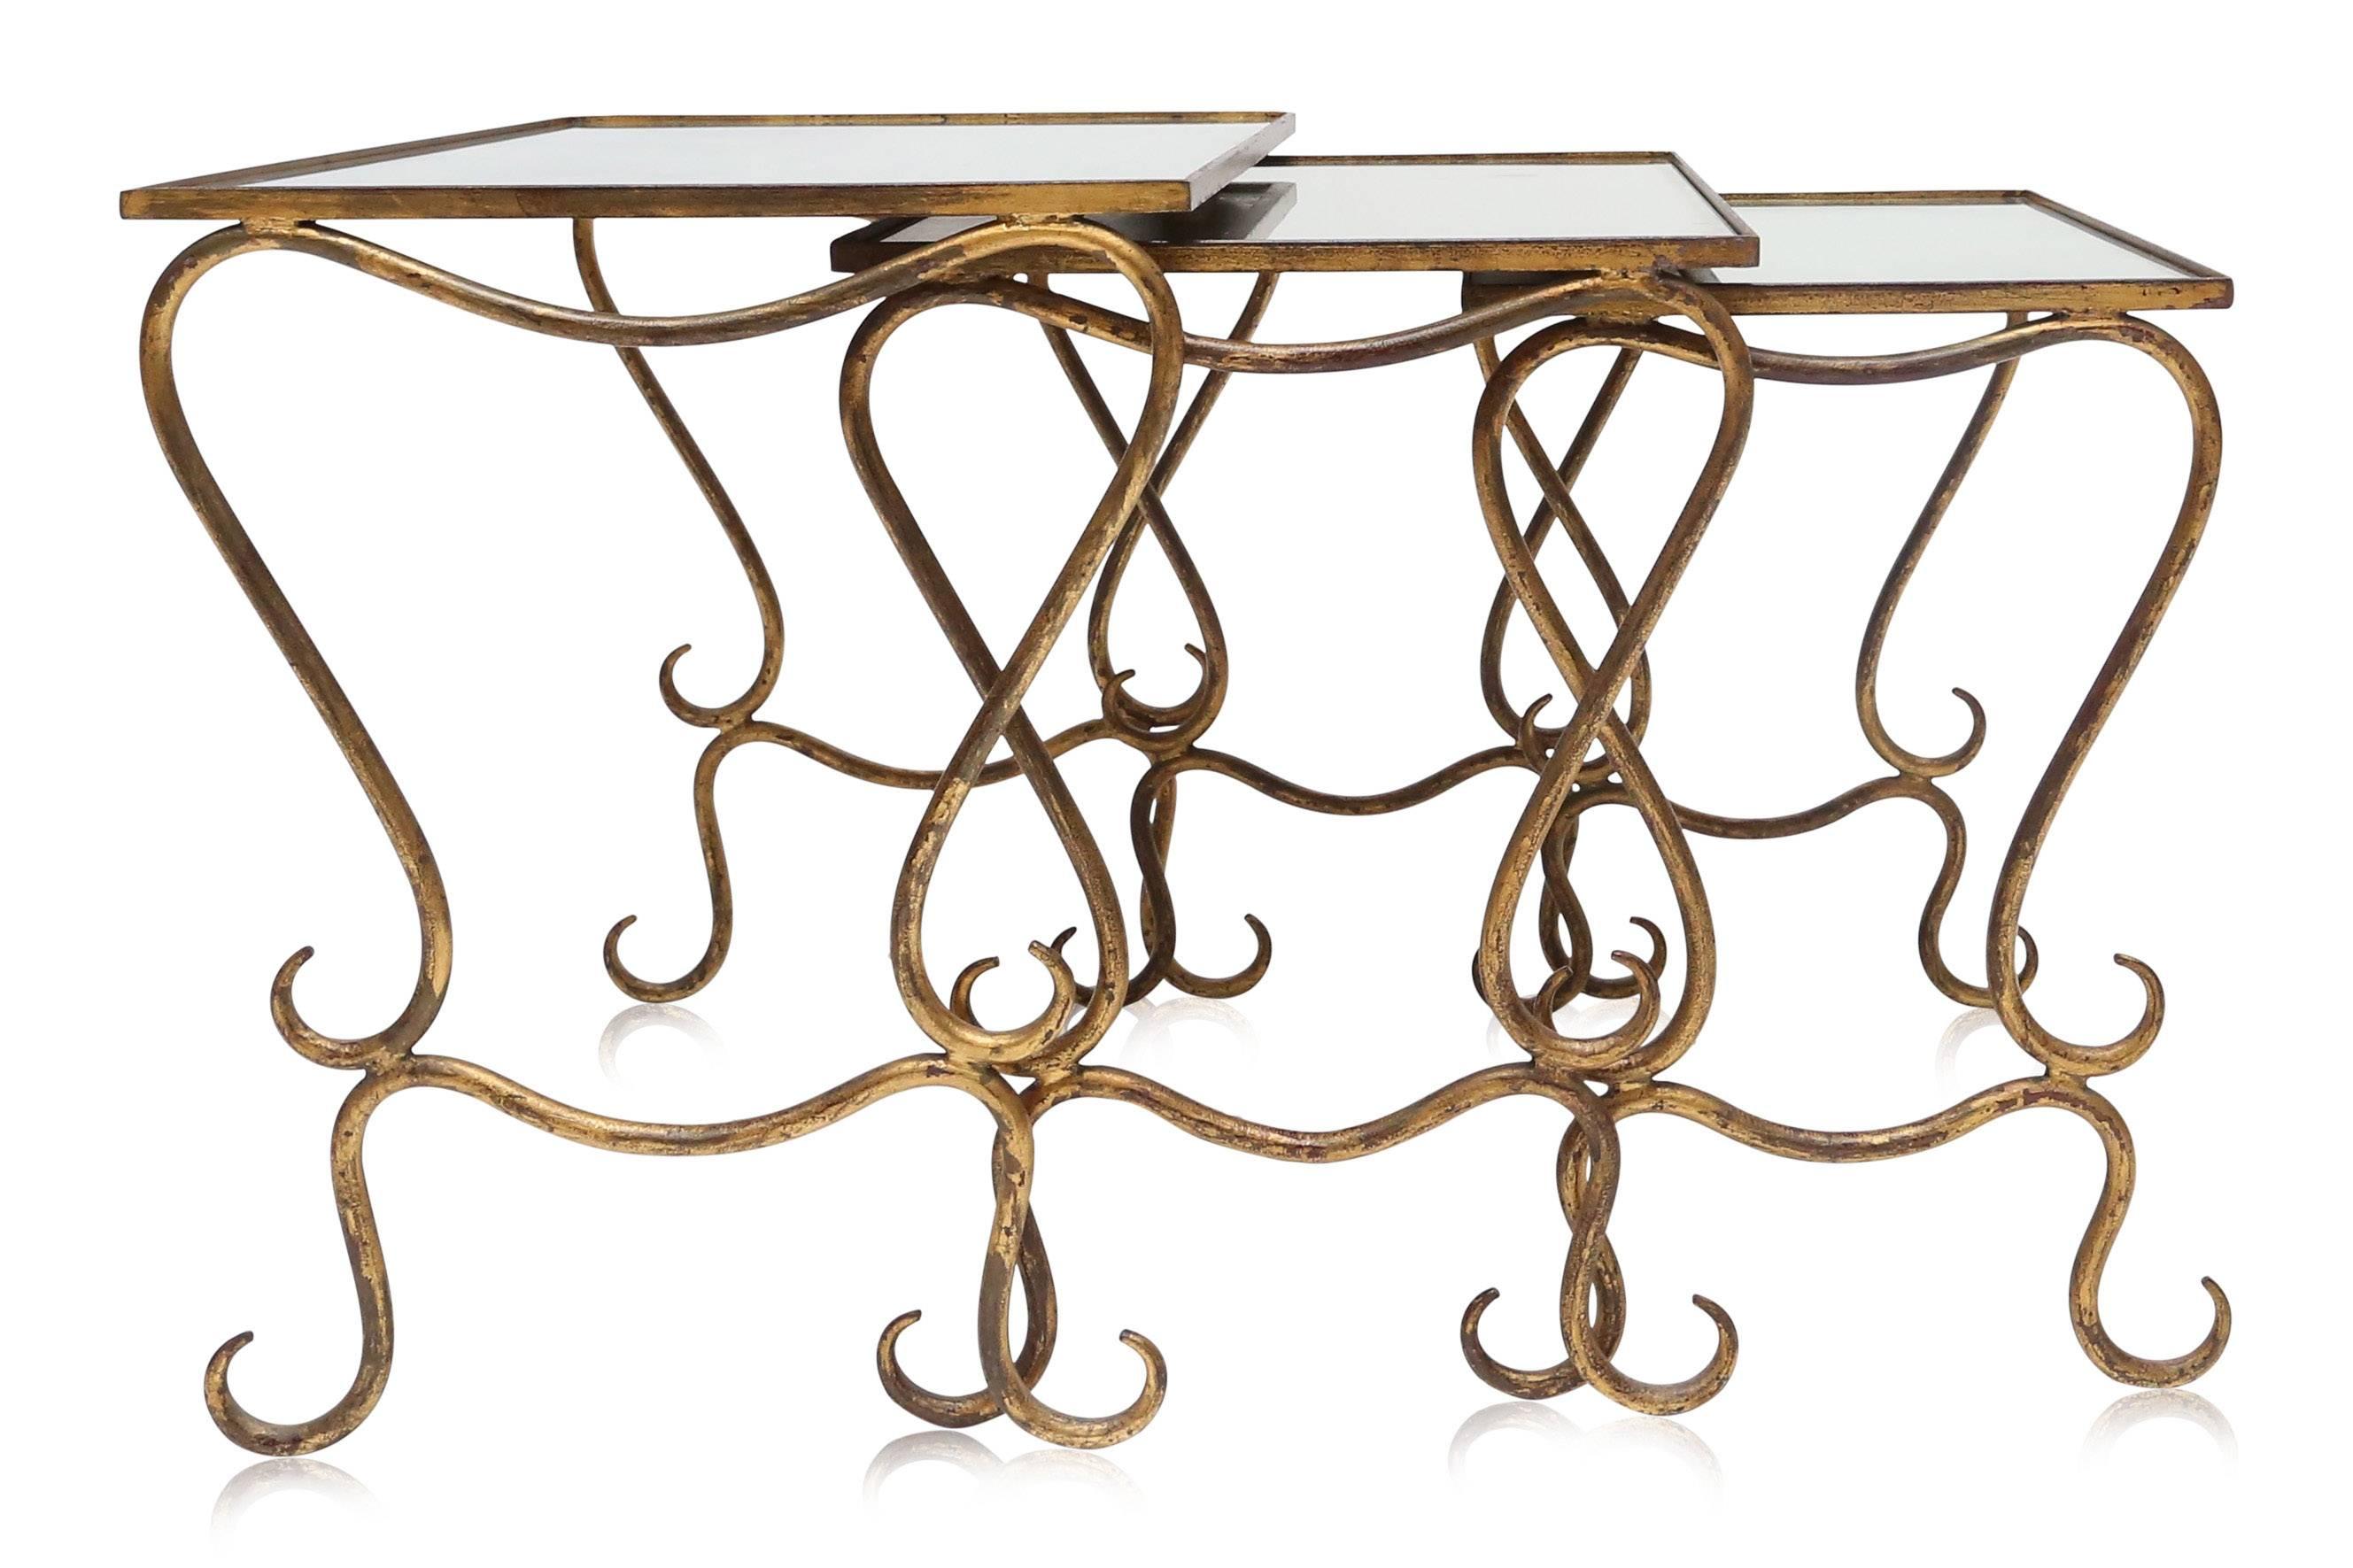 Price on request.
Tables gigognes - nesting tables in gilded wrought iron,
by René Drouet, France, circa 1940.
Beautiful original worn glass tops.
Measures: L 55 cm, D 40 cm, H 48 mc.
   